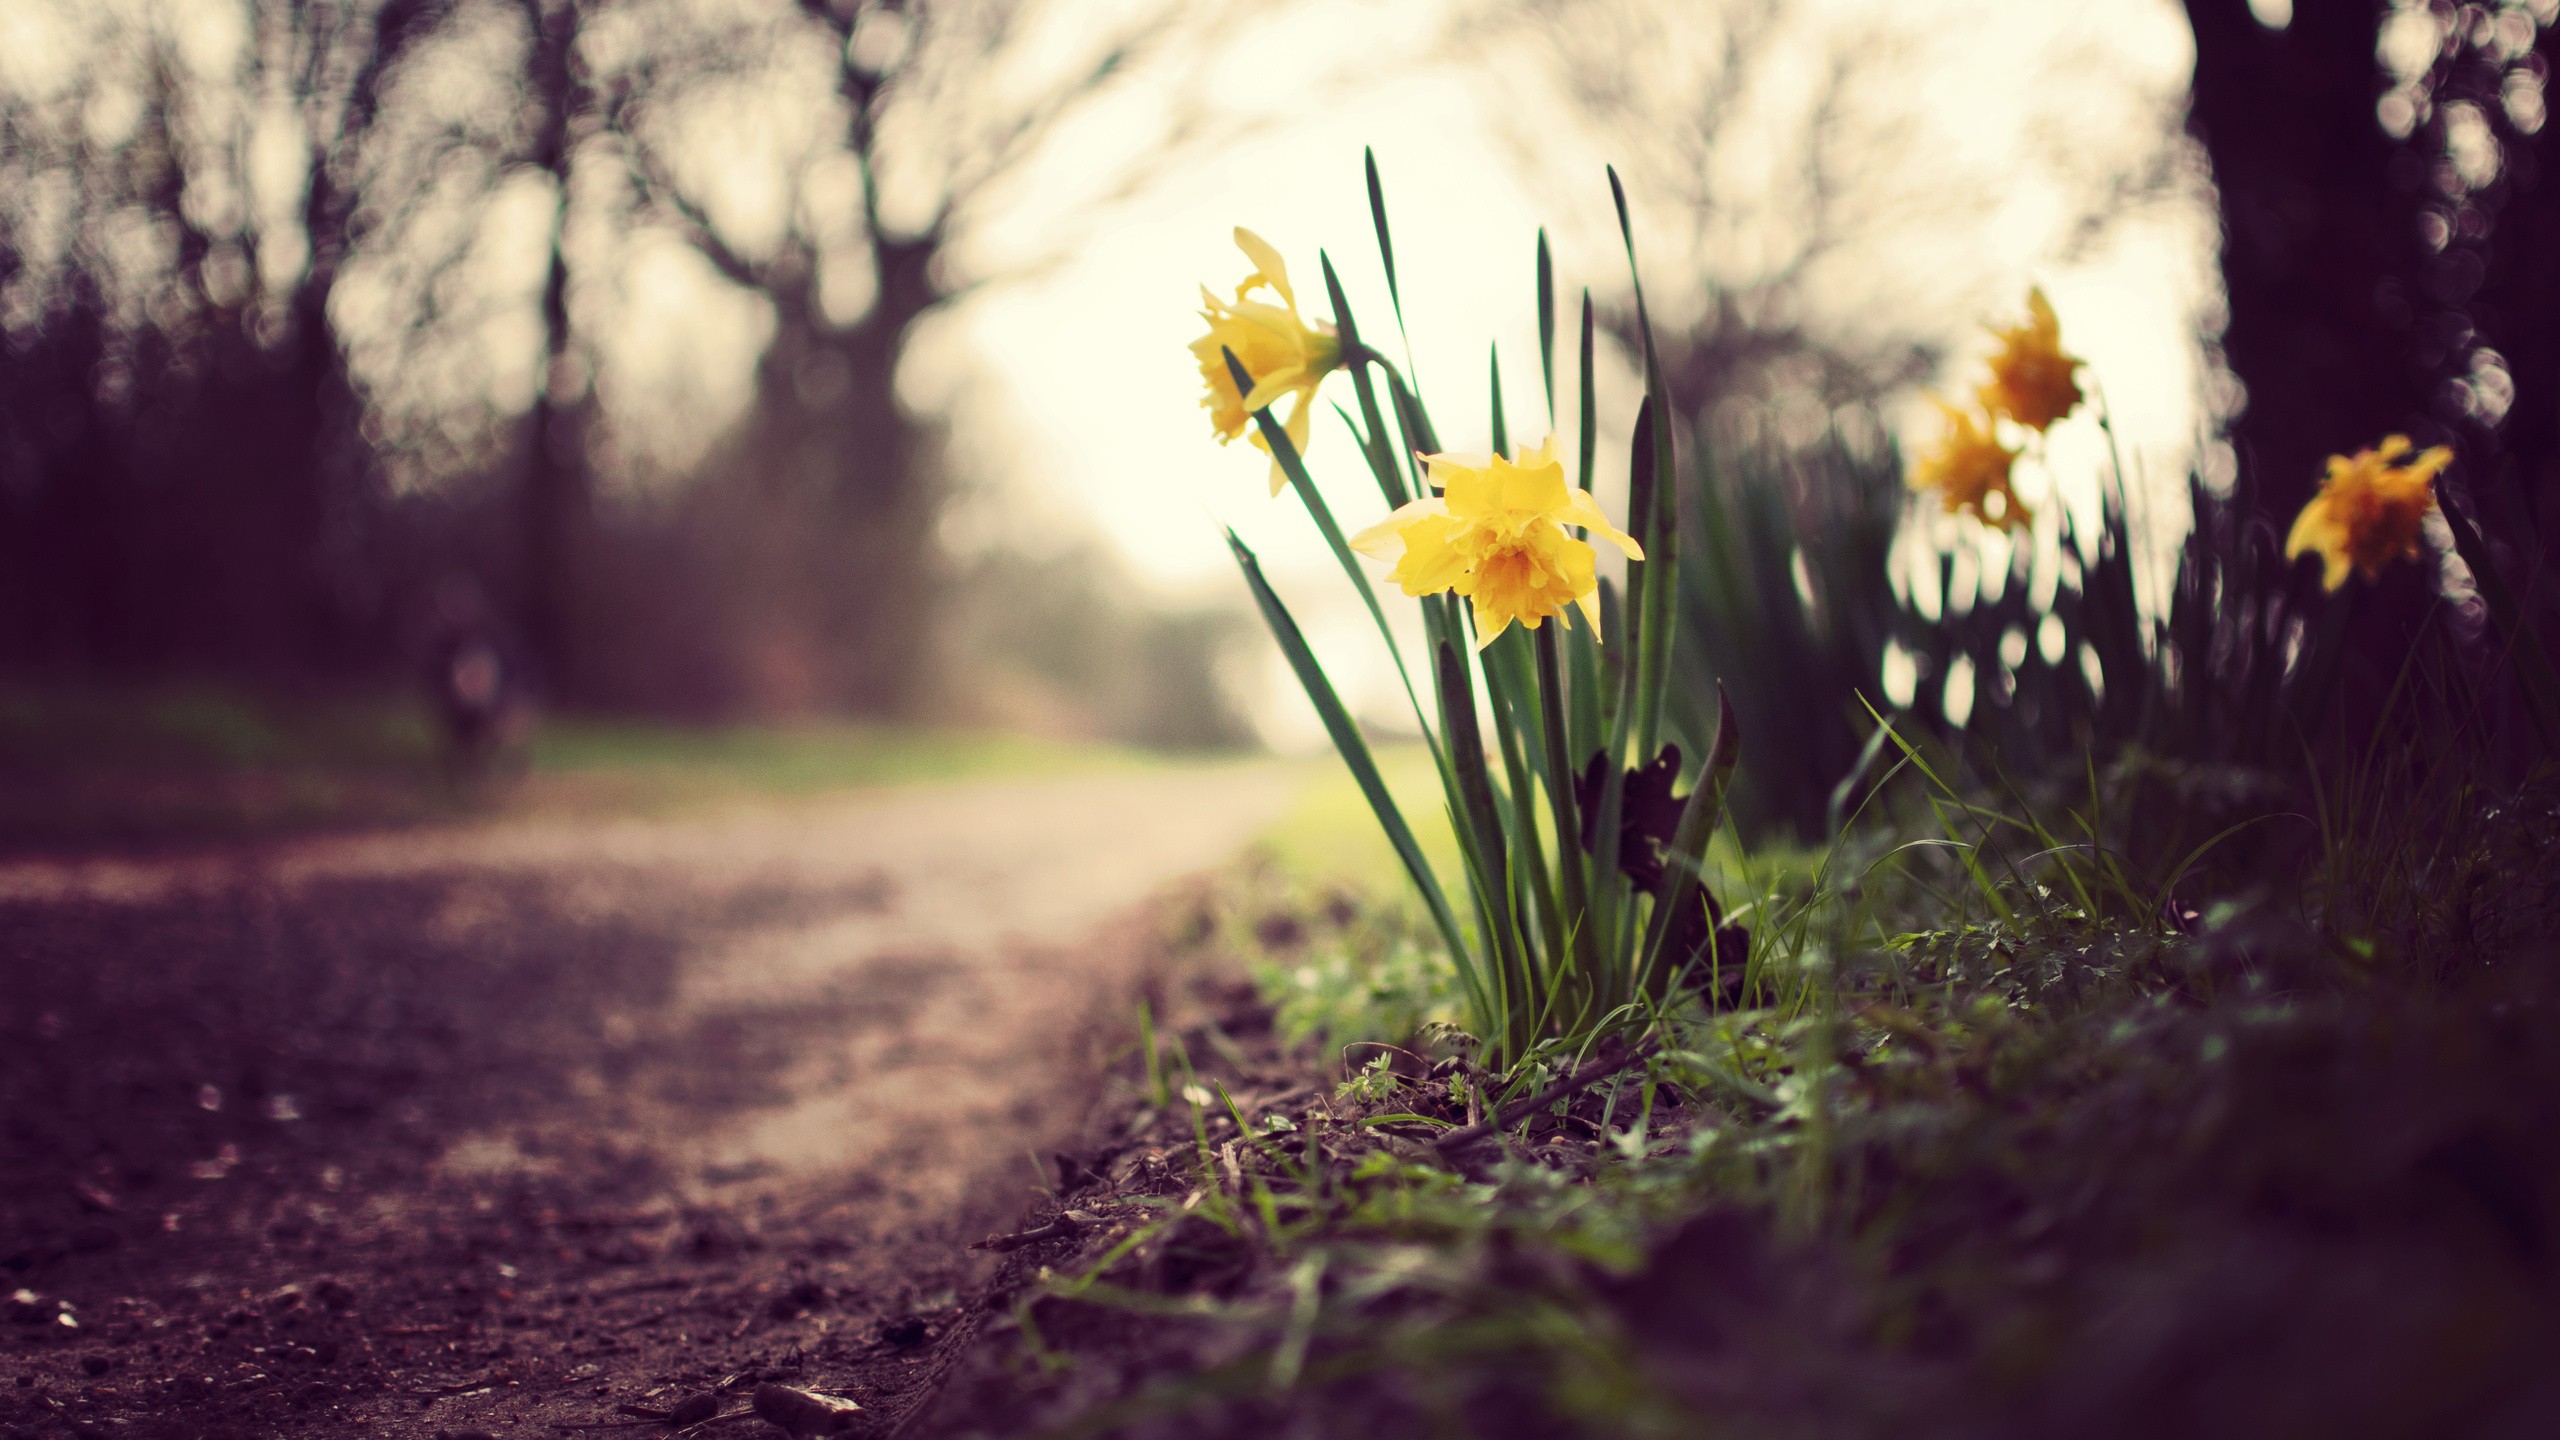 General 2560x1440 flowers dirt yellow flowers depth of field plants outdoors daffodils